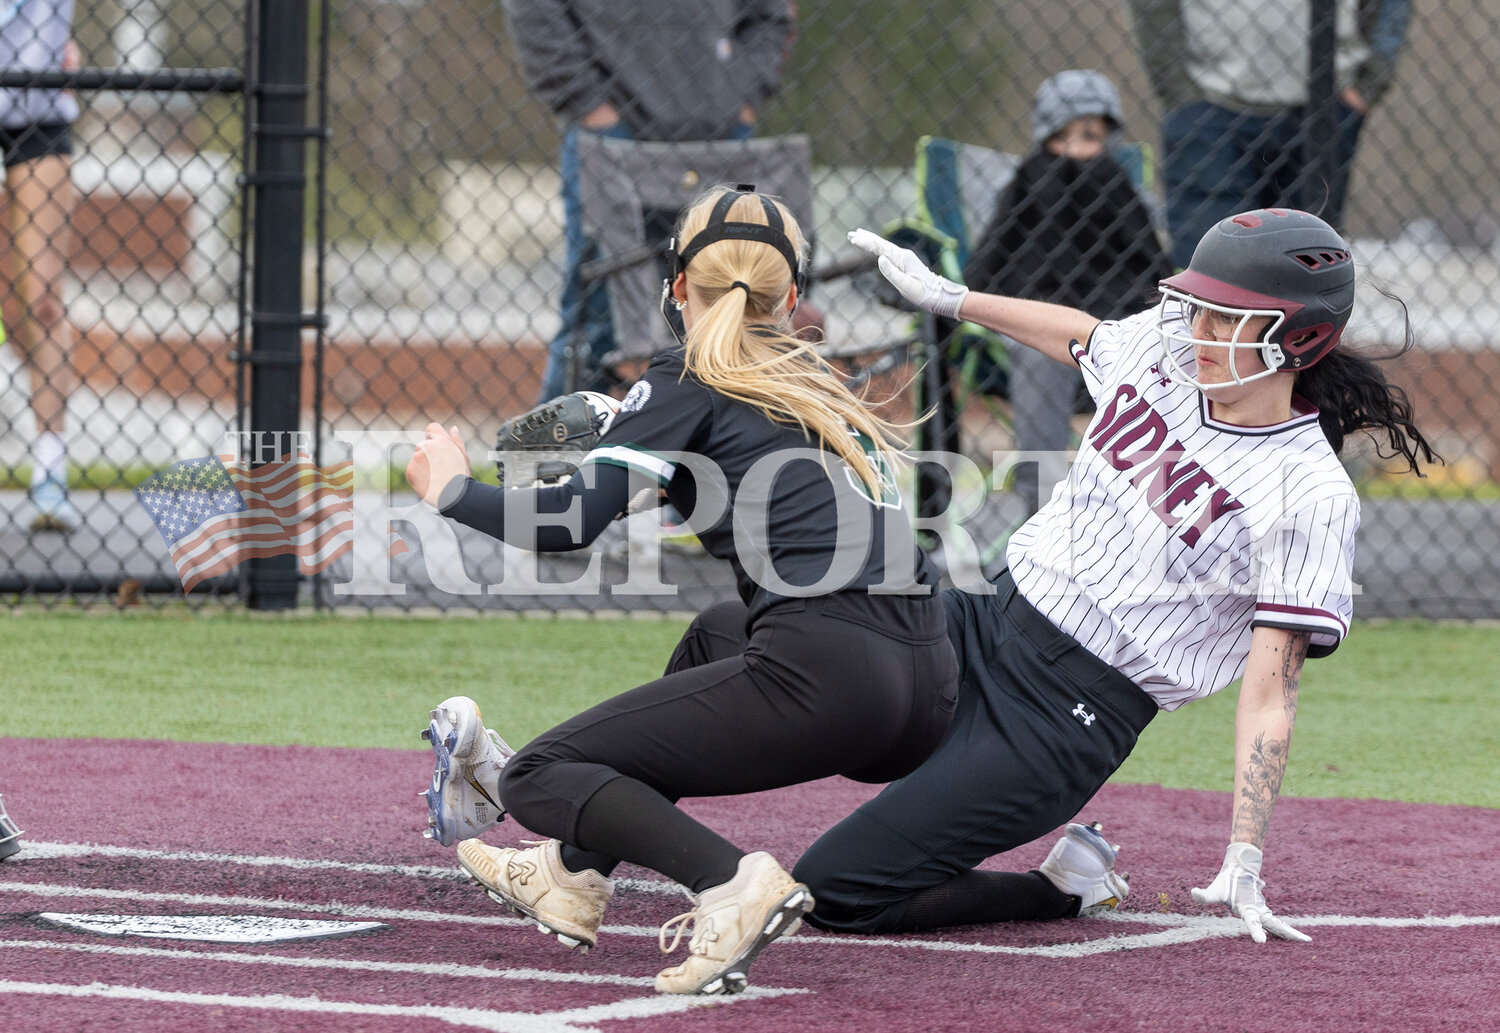 Sidney’s Sammy Constable slides home to score a run as Unatego’s Bailey McCoy defends during her team’s 14-6 win over Unatego Friday, April 12.